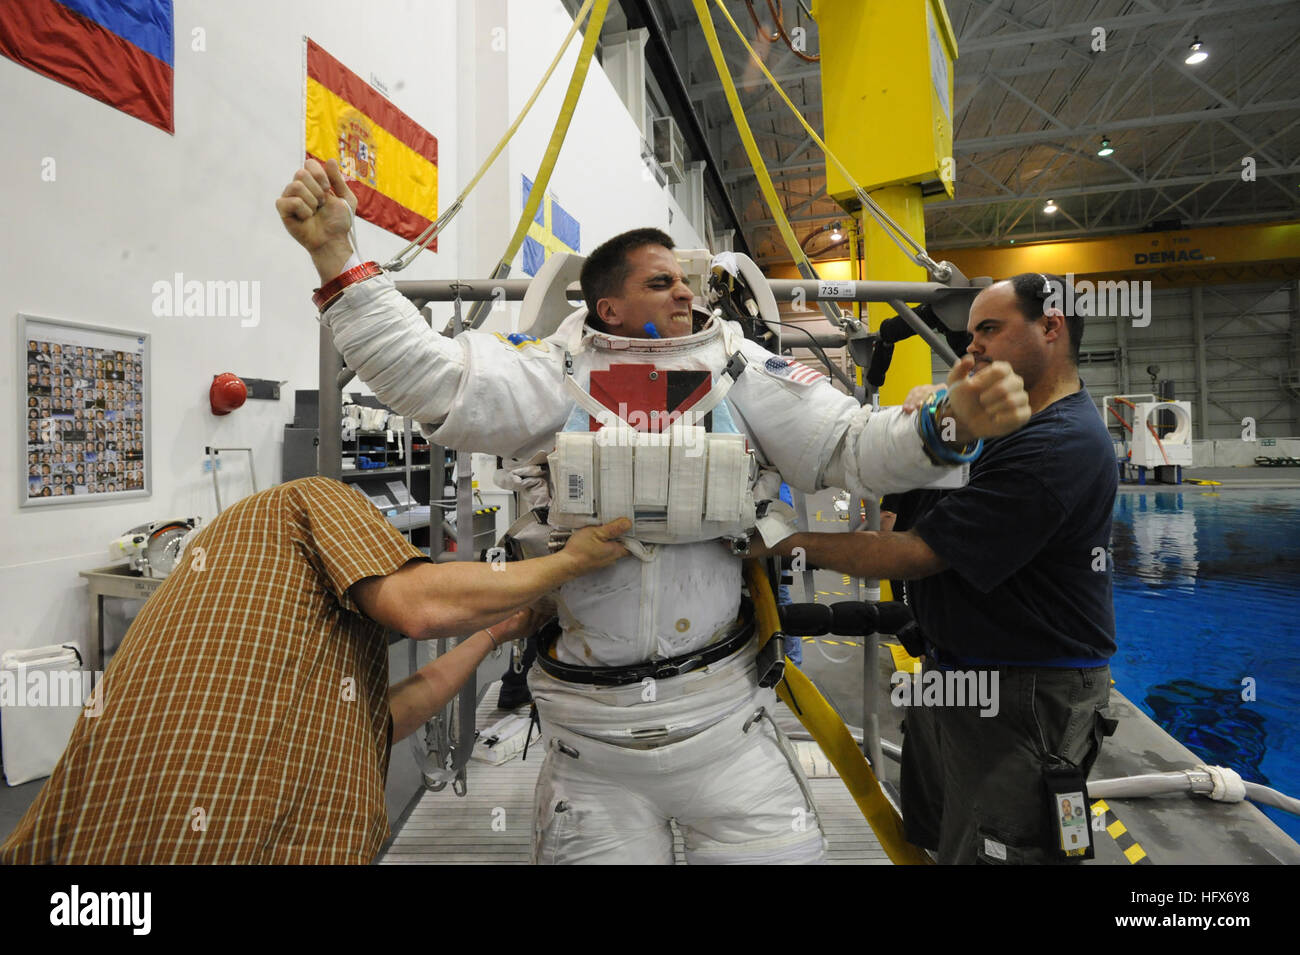 090324-N-2959L-143 HOUSTON (March 24, 2009) Lt. Cmdr. Chris Cassidy receives help donning his space suit before a training session at the Neutral Buoyancy Laboratory (NLB) in Houston. The air-and-water-tight space suit will be pressurized with an additional four pounds of pressure per square inch to simulate the suit weight astronauts experience during spacewalks. The NBL is a pool that simulates zero gravity to train astronauts for upcoming missions. The NBL contains full mock-ups of the International Space Station for the astronauts to train with. Cassidy, a U.S. Navy SEAL, is a mission spec Stock Photo